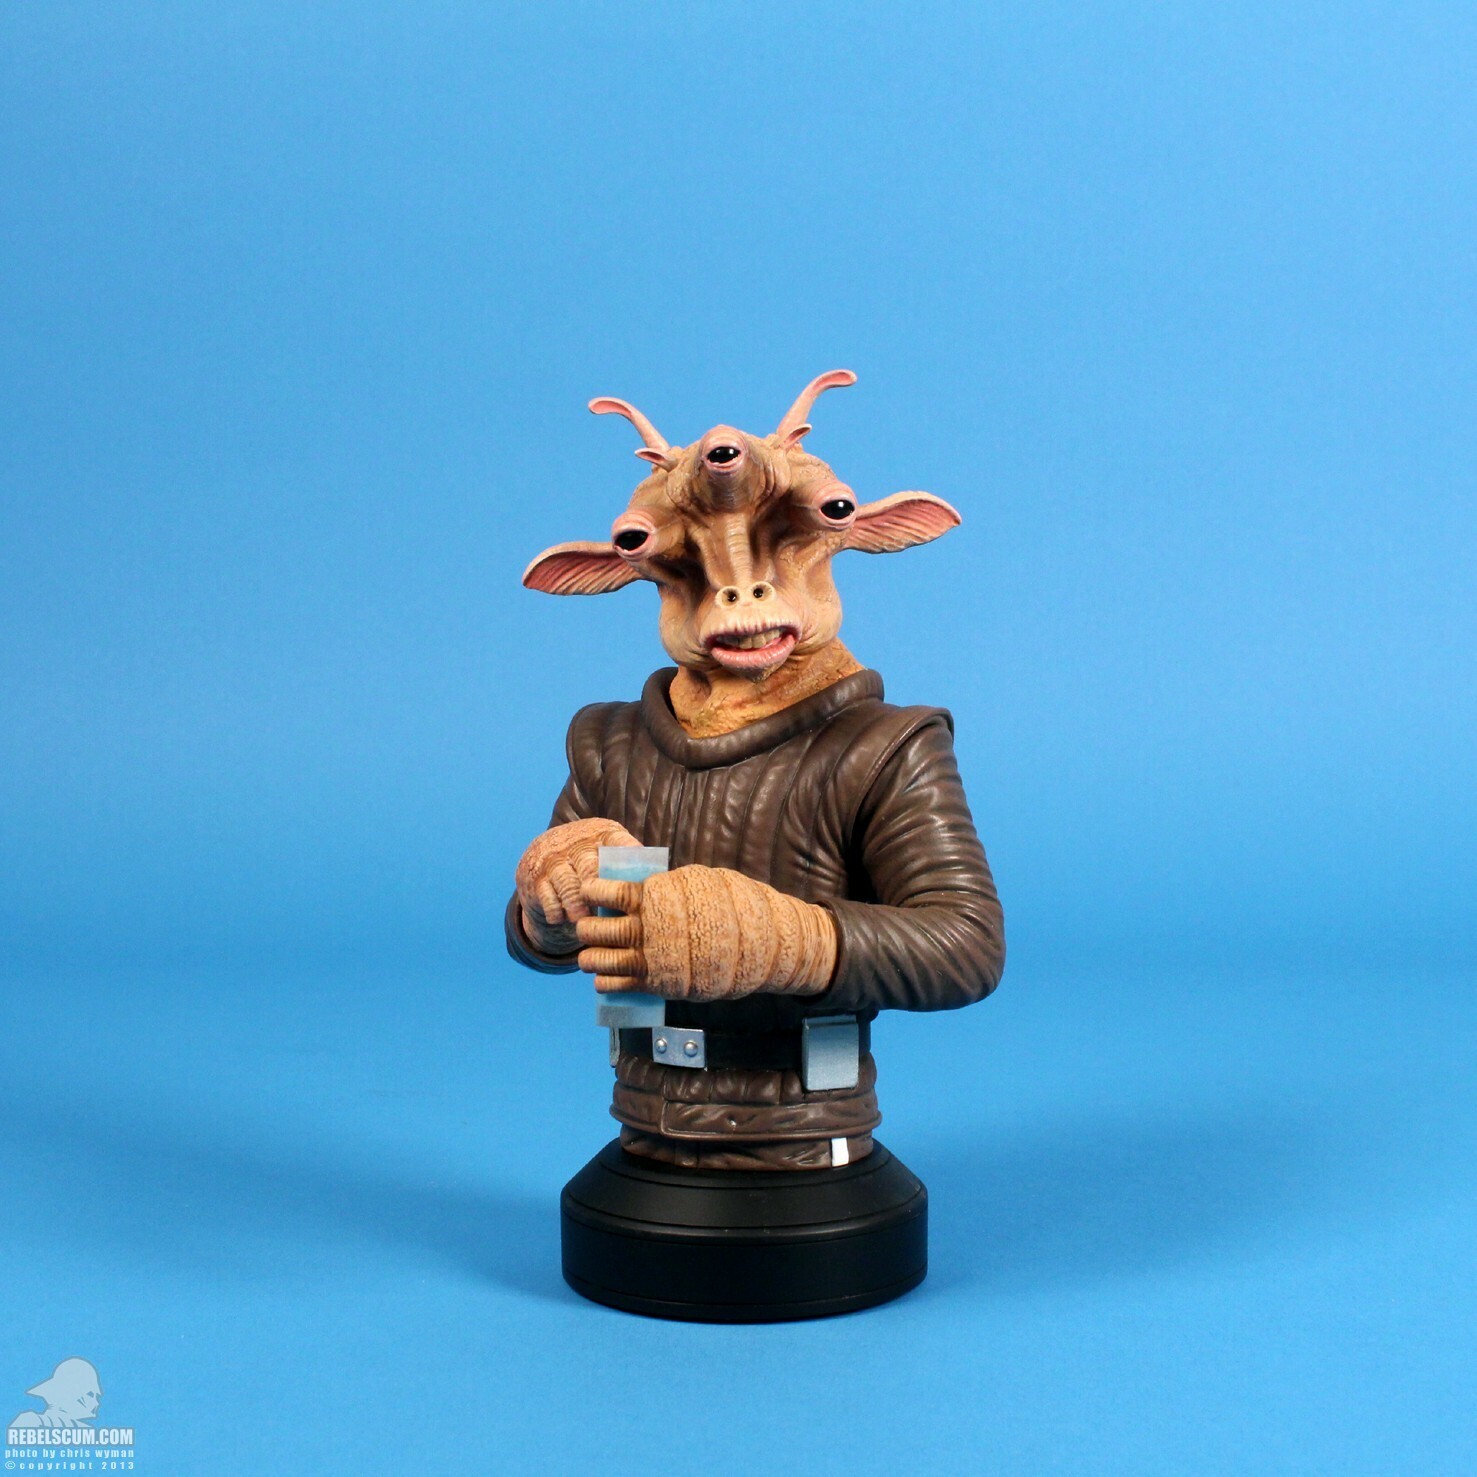 Star Wars Return of the Jedi Ree-Yees Deluxe Limited Edition 2013 Bust